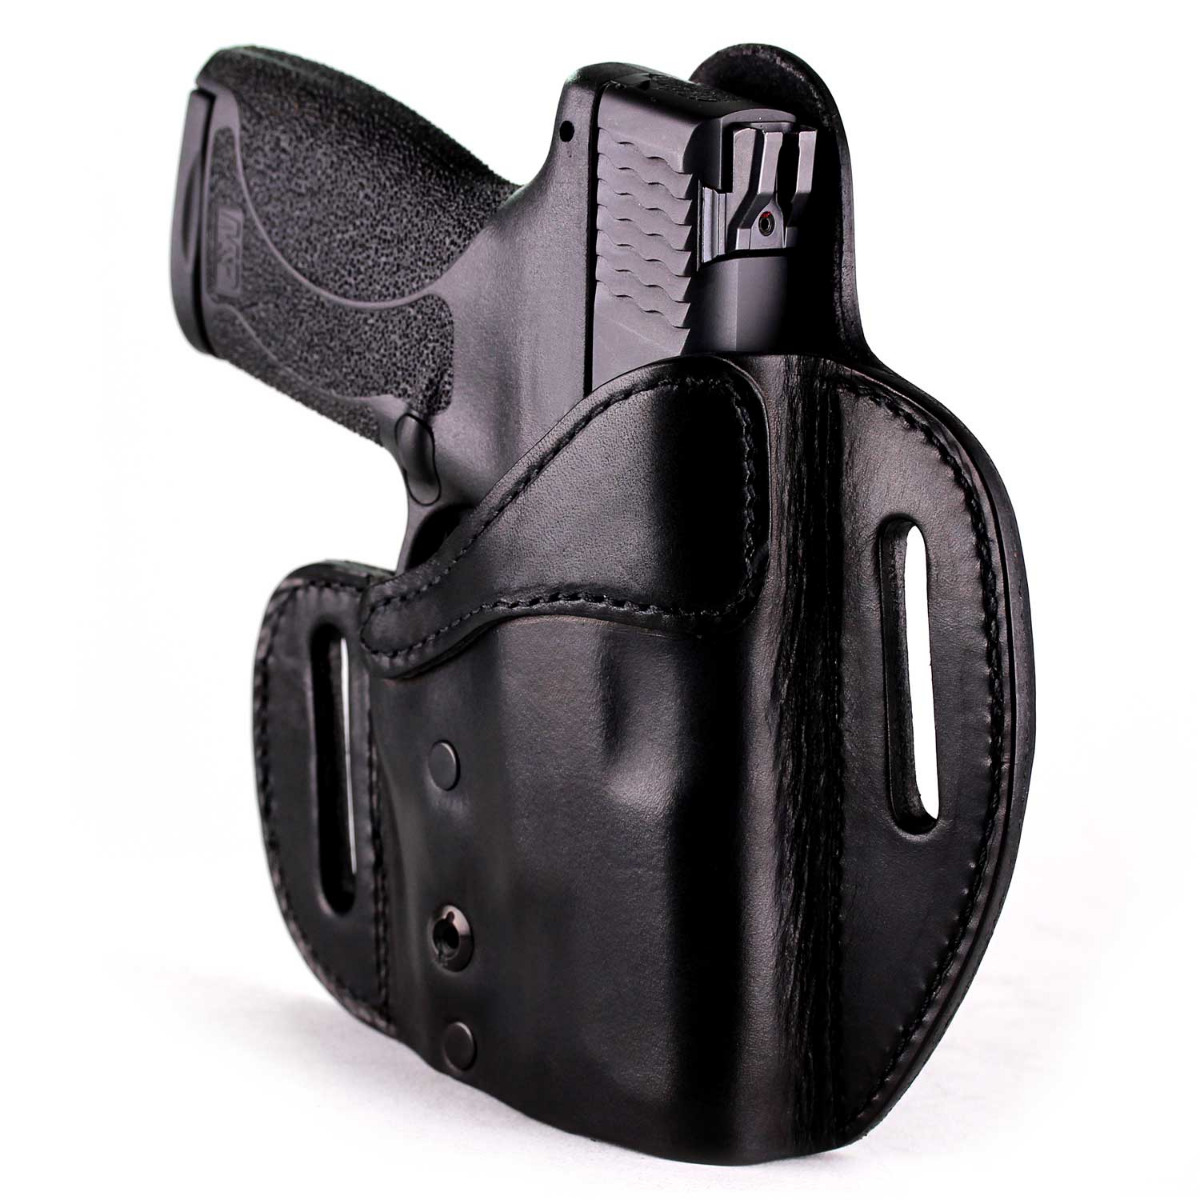 HD Concealed RH LH OWB IWB Leather Gun Holster For Kimber Solo Ultra II 